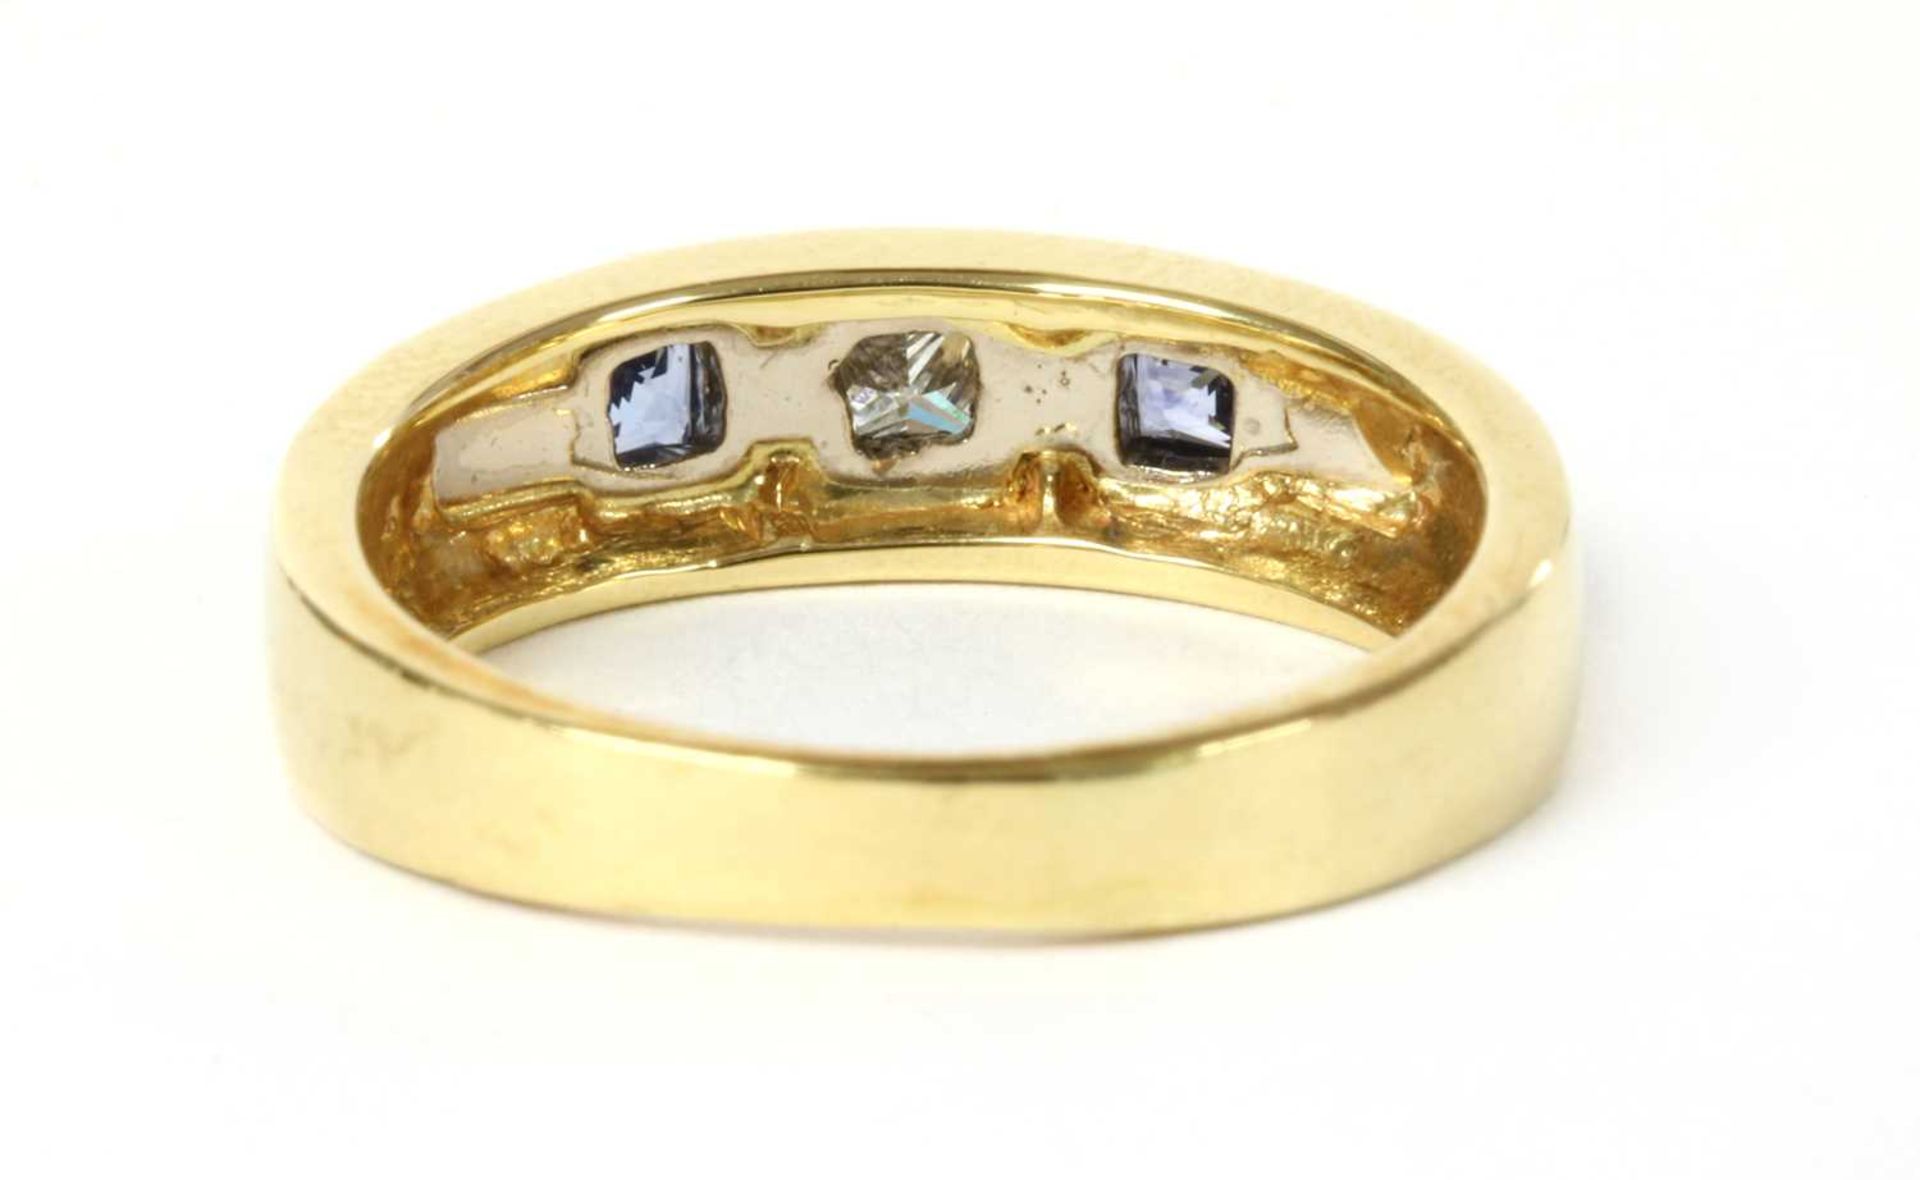 An 18ct gold diamond and tanzanite ring, by Clogau, - Image 3 of 3